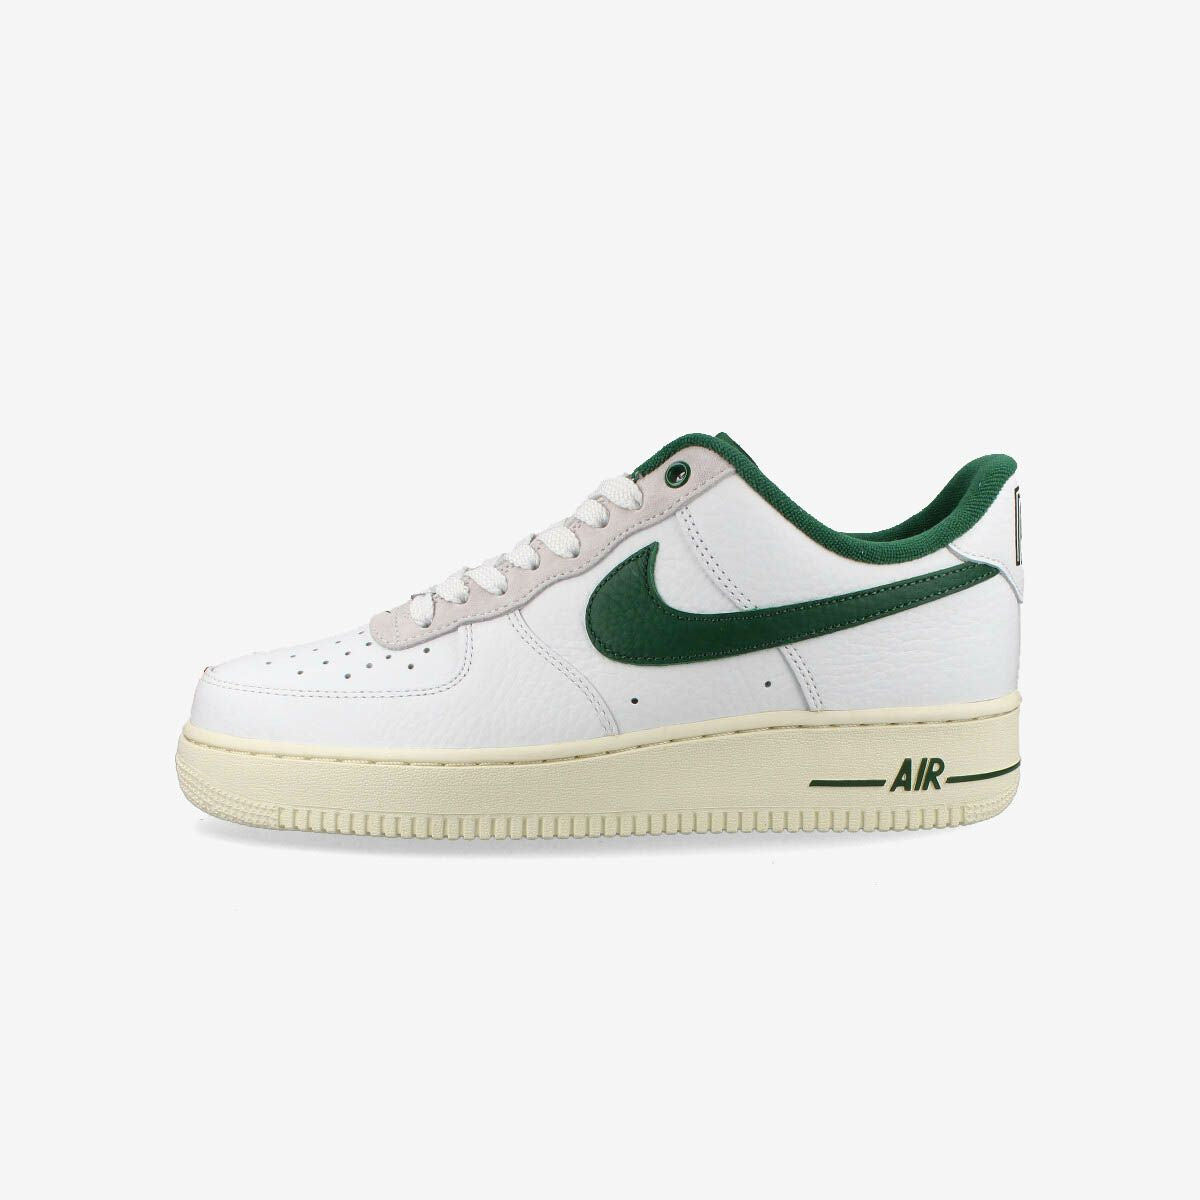 NIKE WMNS AIR FORCE 1 '07 LX SUMMIT WHITE/GORGE GREEN/WHITE 【COMMAND FORCE】